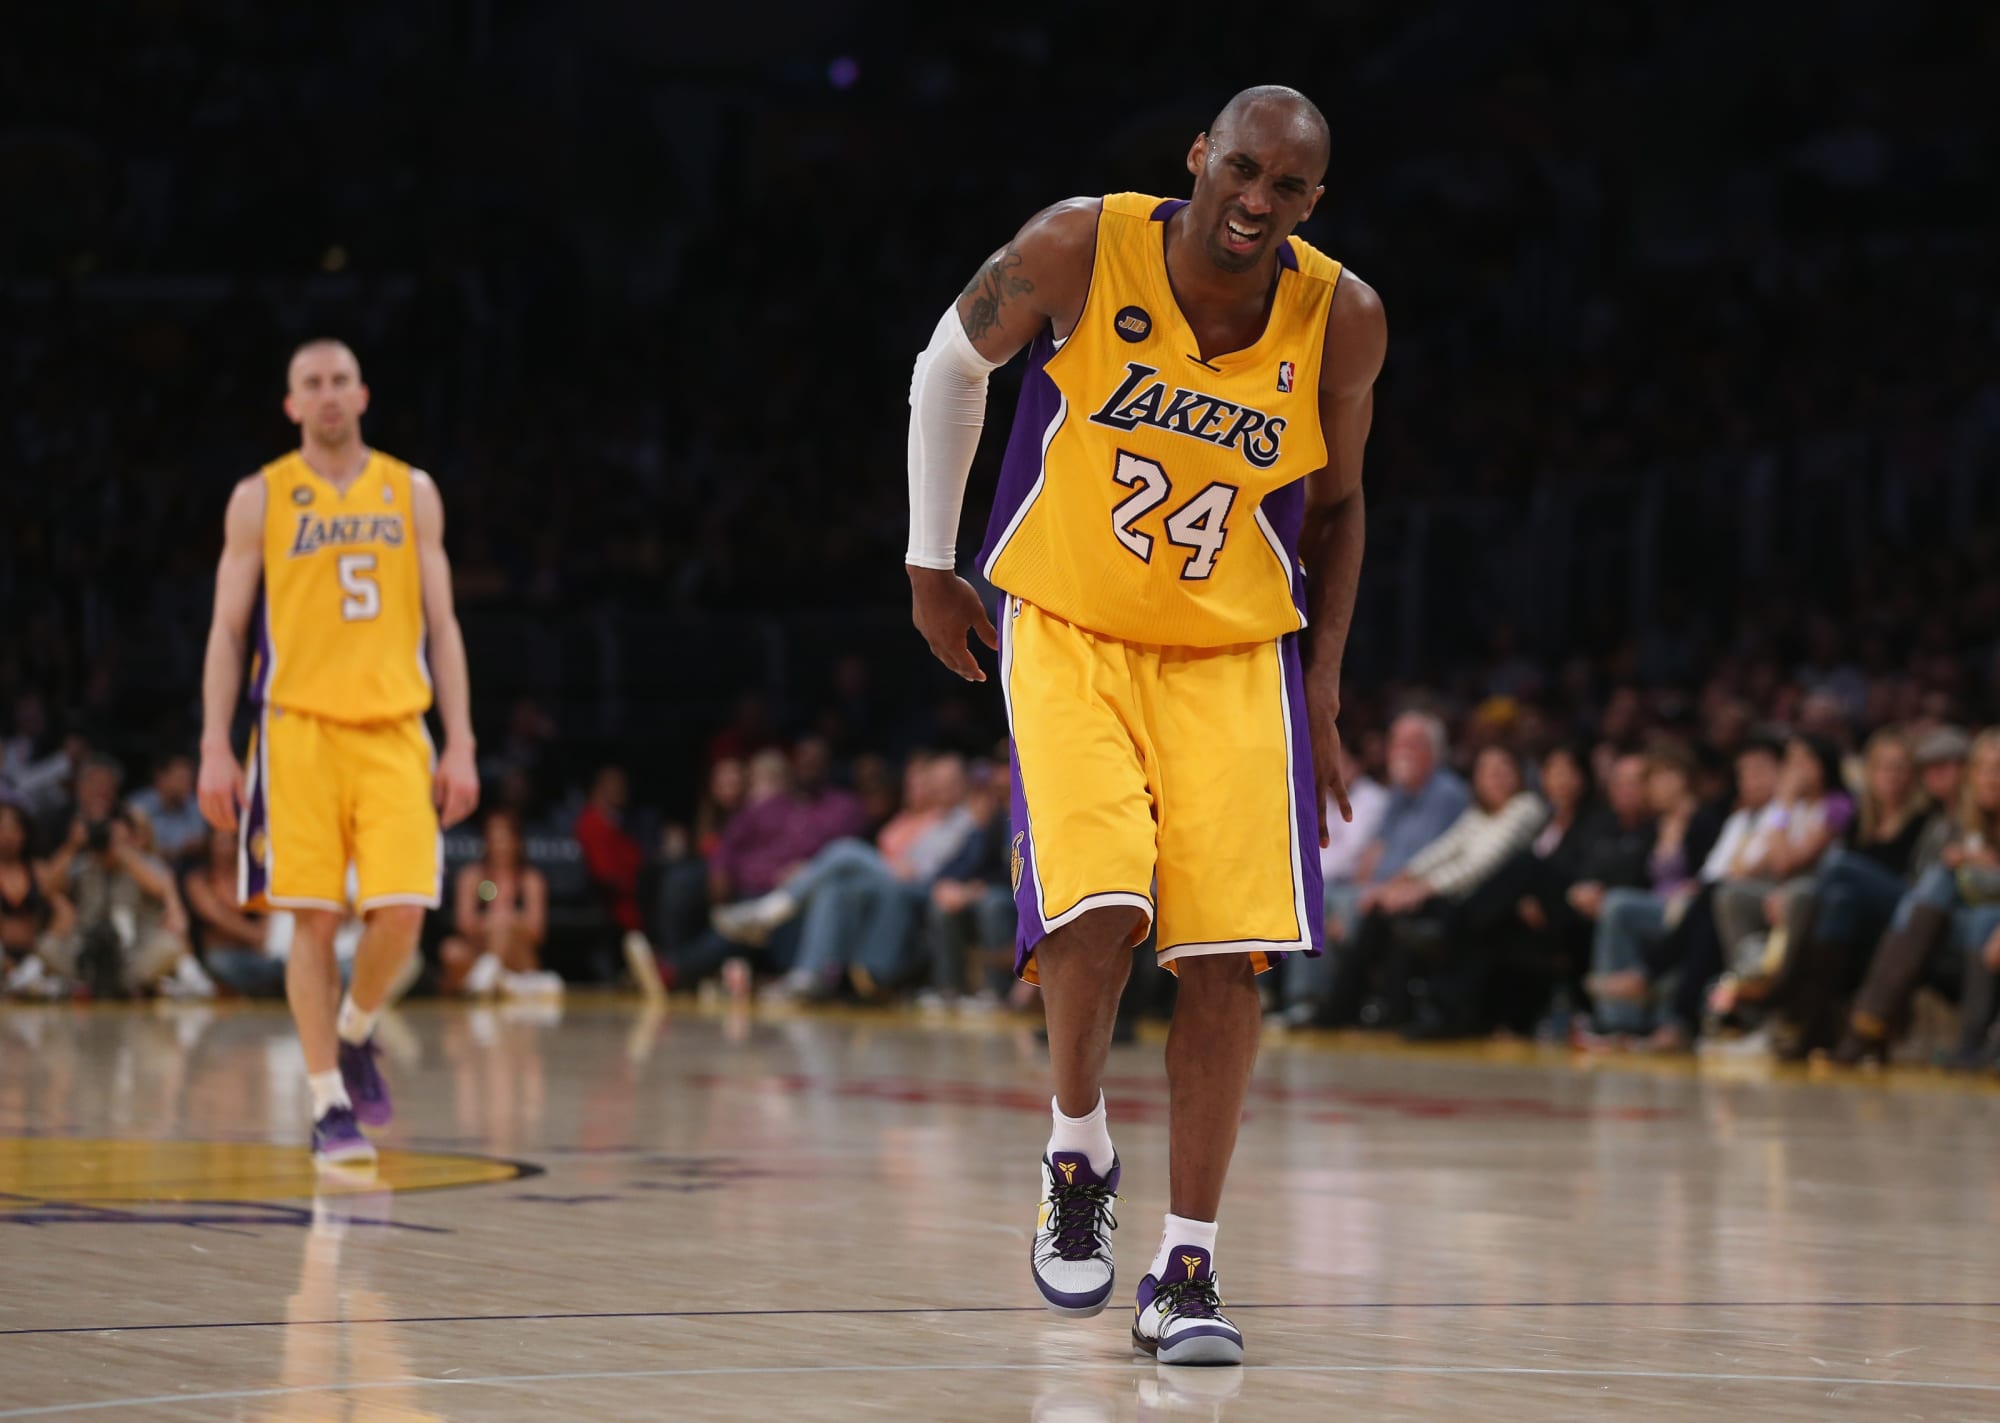 The Mambathon Continues Part III: My Journey With Kobe Bryant - Writing On  The Ball